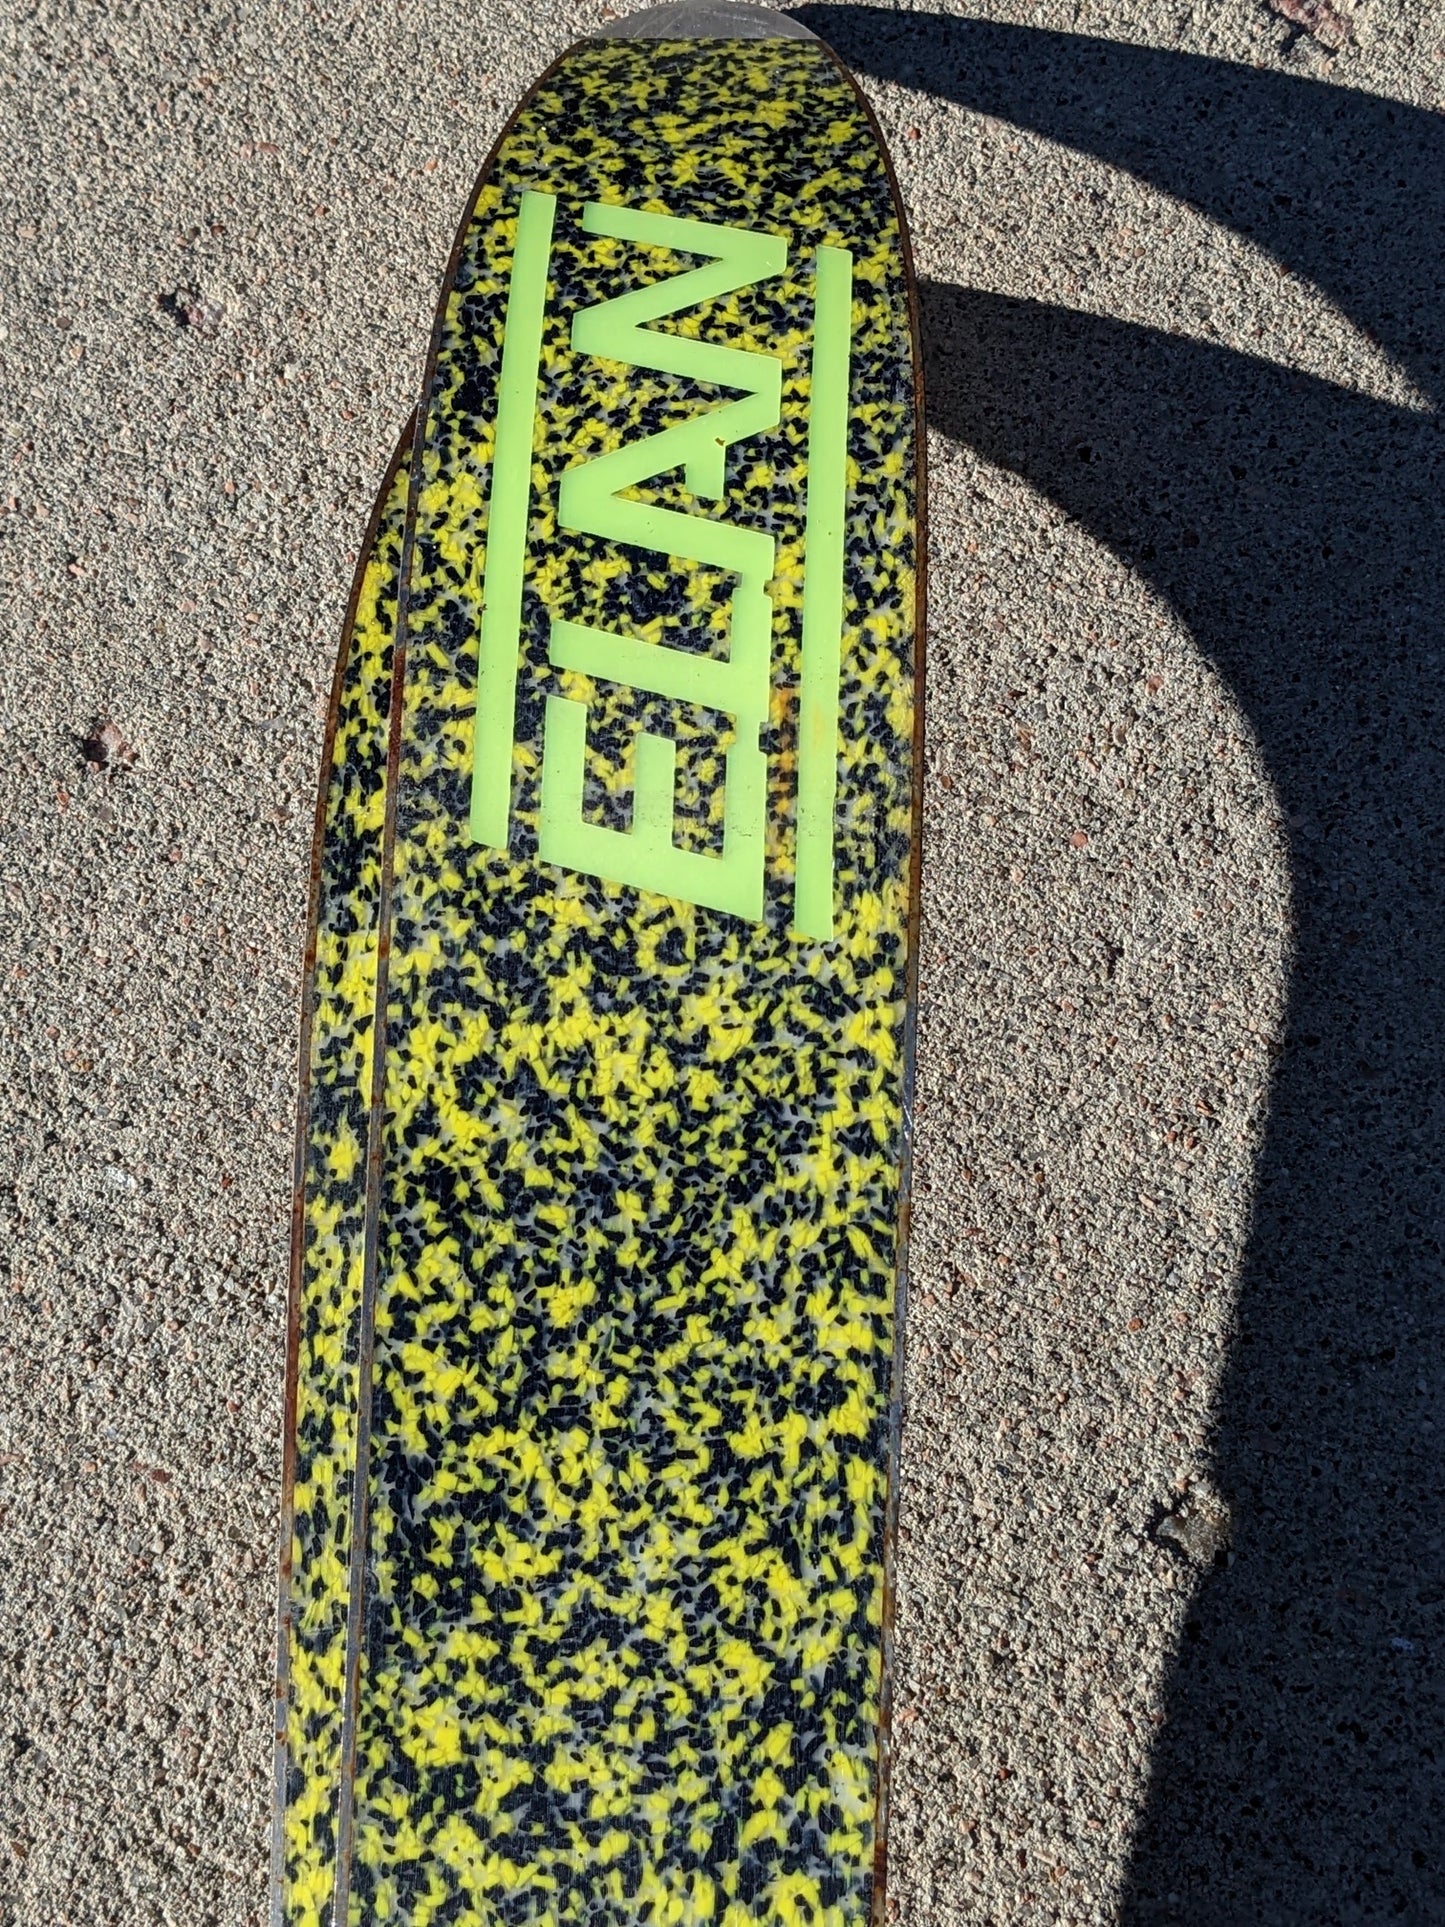 Elan MBX Lightspeed Skis *NO Bindings* Size 185 Cm Color Yellow Condition Used